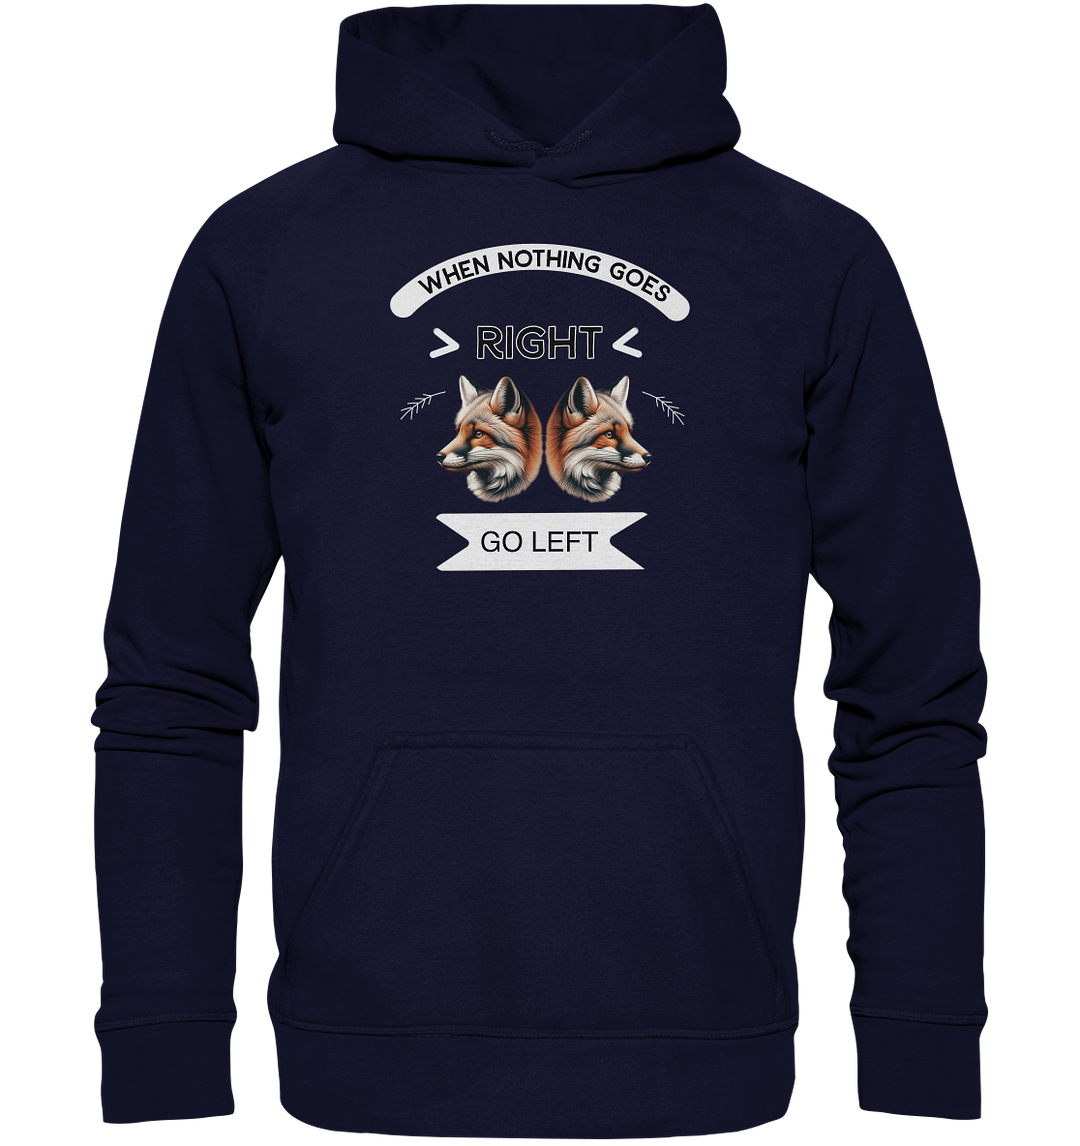 WHEN NOTHING GOES RIGHT 2.0 - Hoodie Unisex